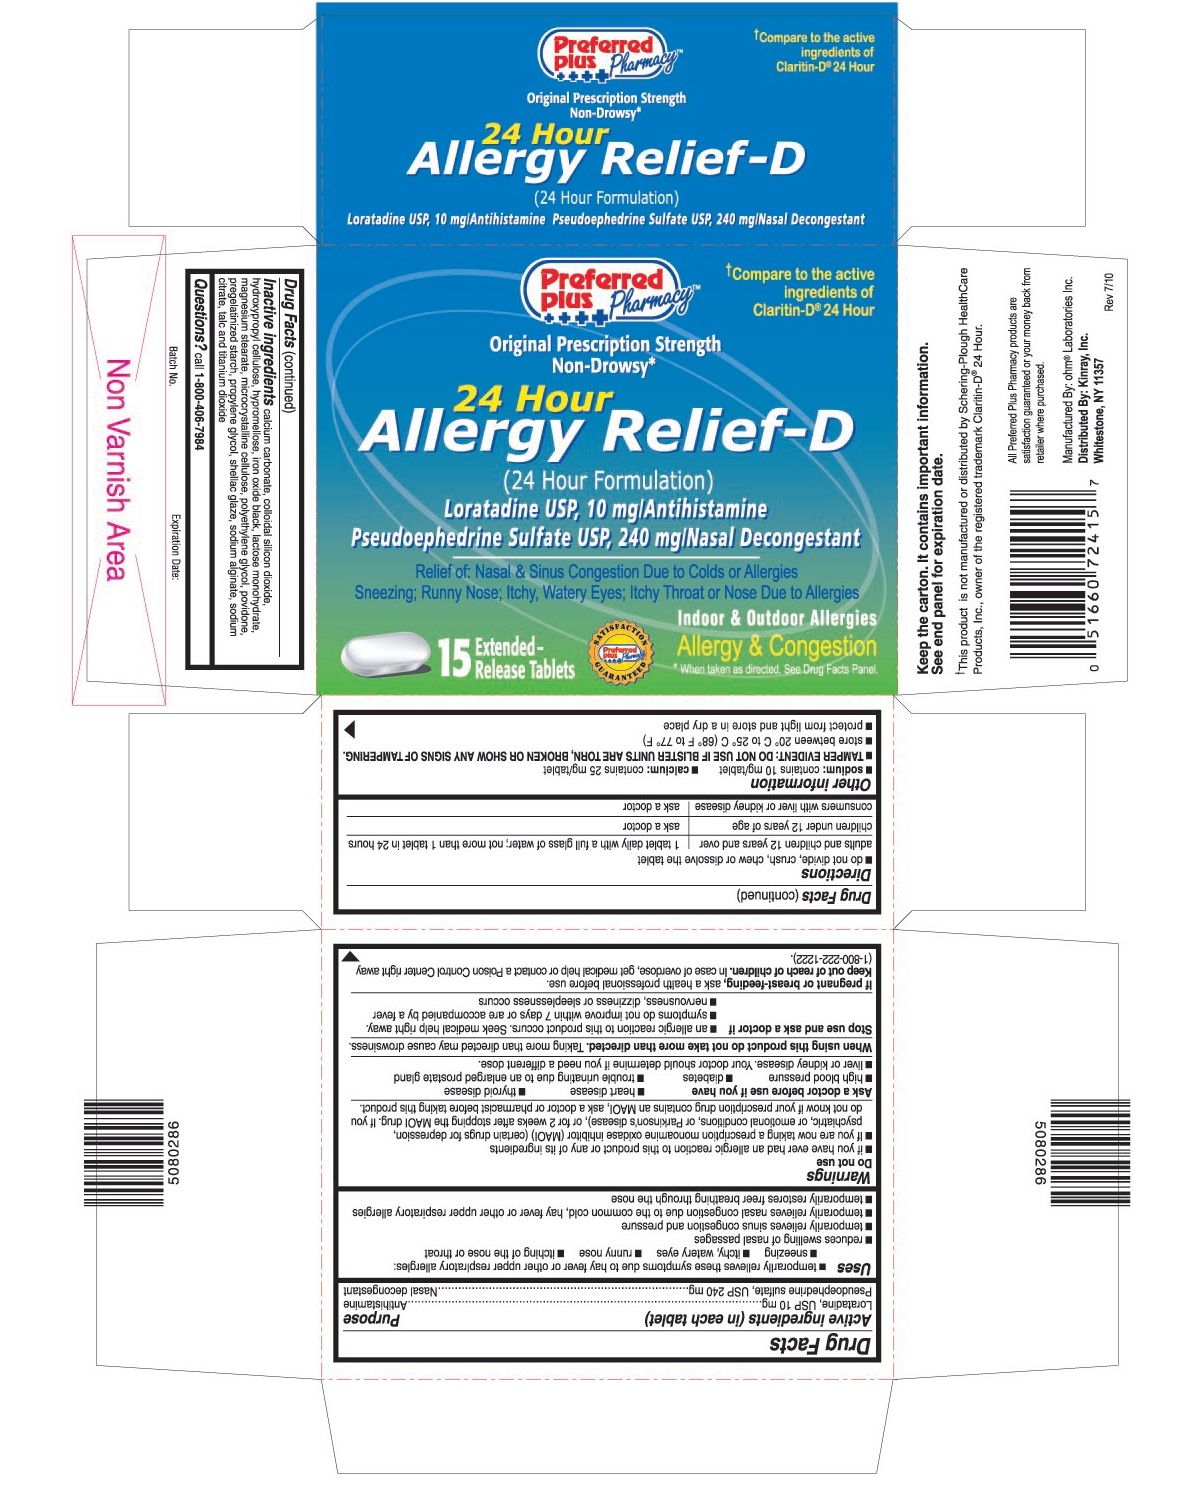 This is the 15 count blister carton label for Preferred Plus Loratadine D extended-release tablets.